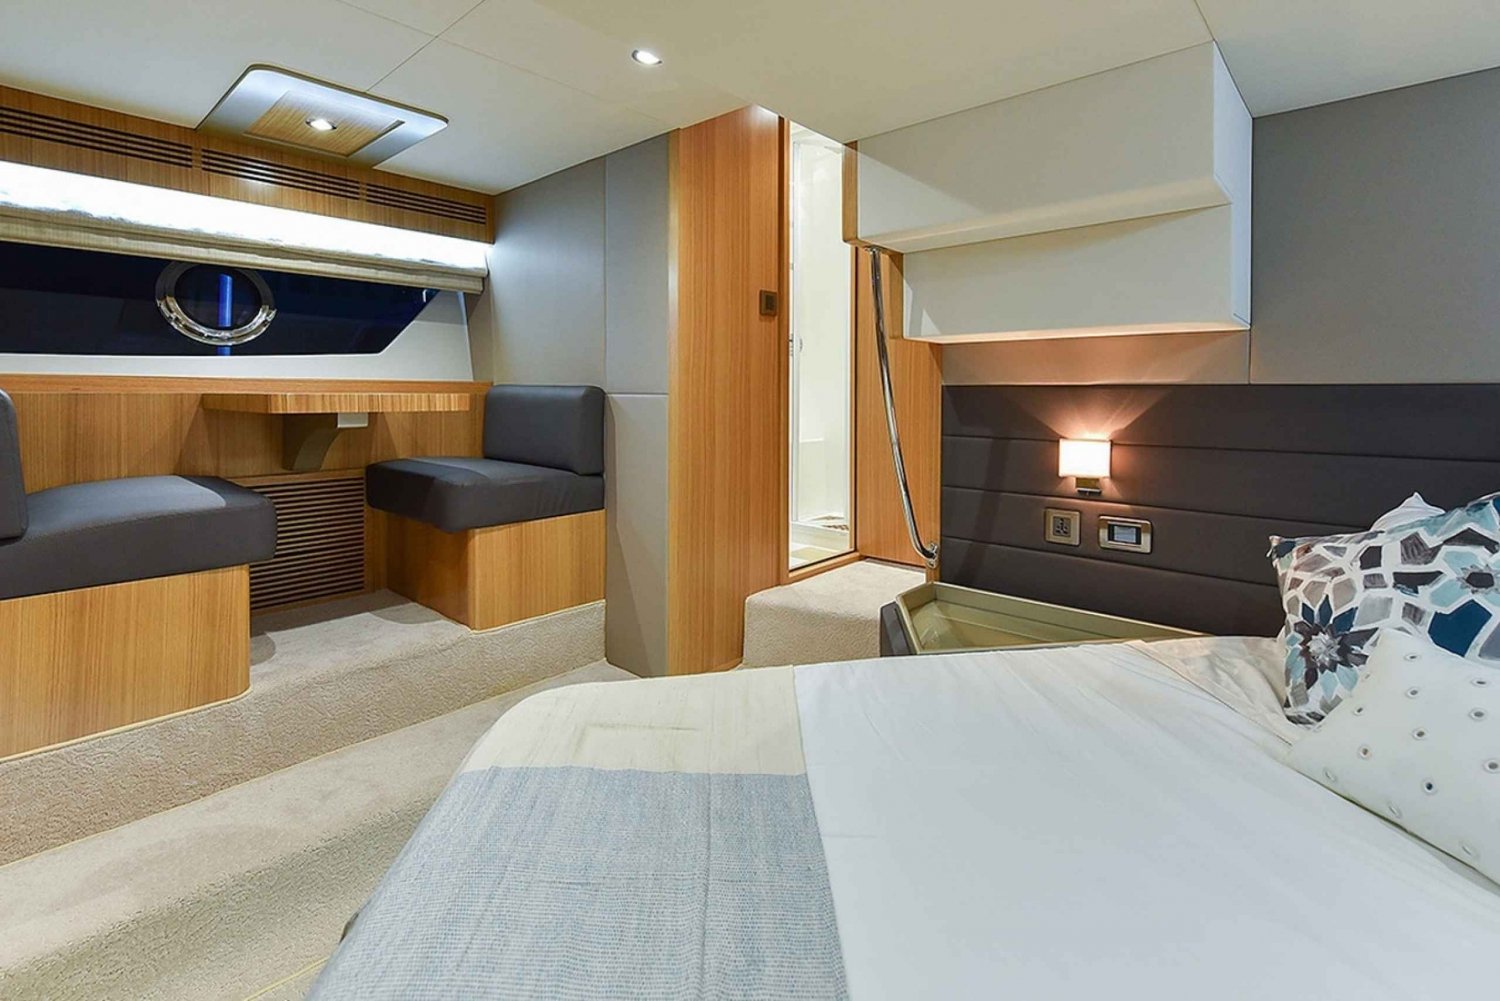 Dubai: Overnight Stay on a Private Luxury Yacht